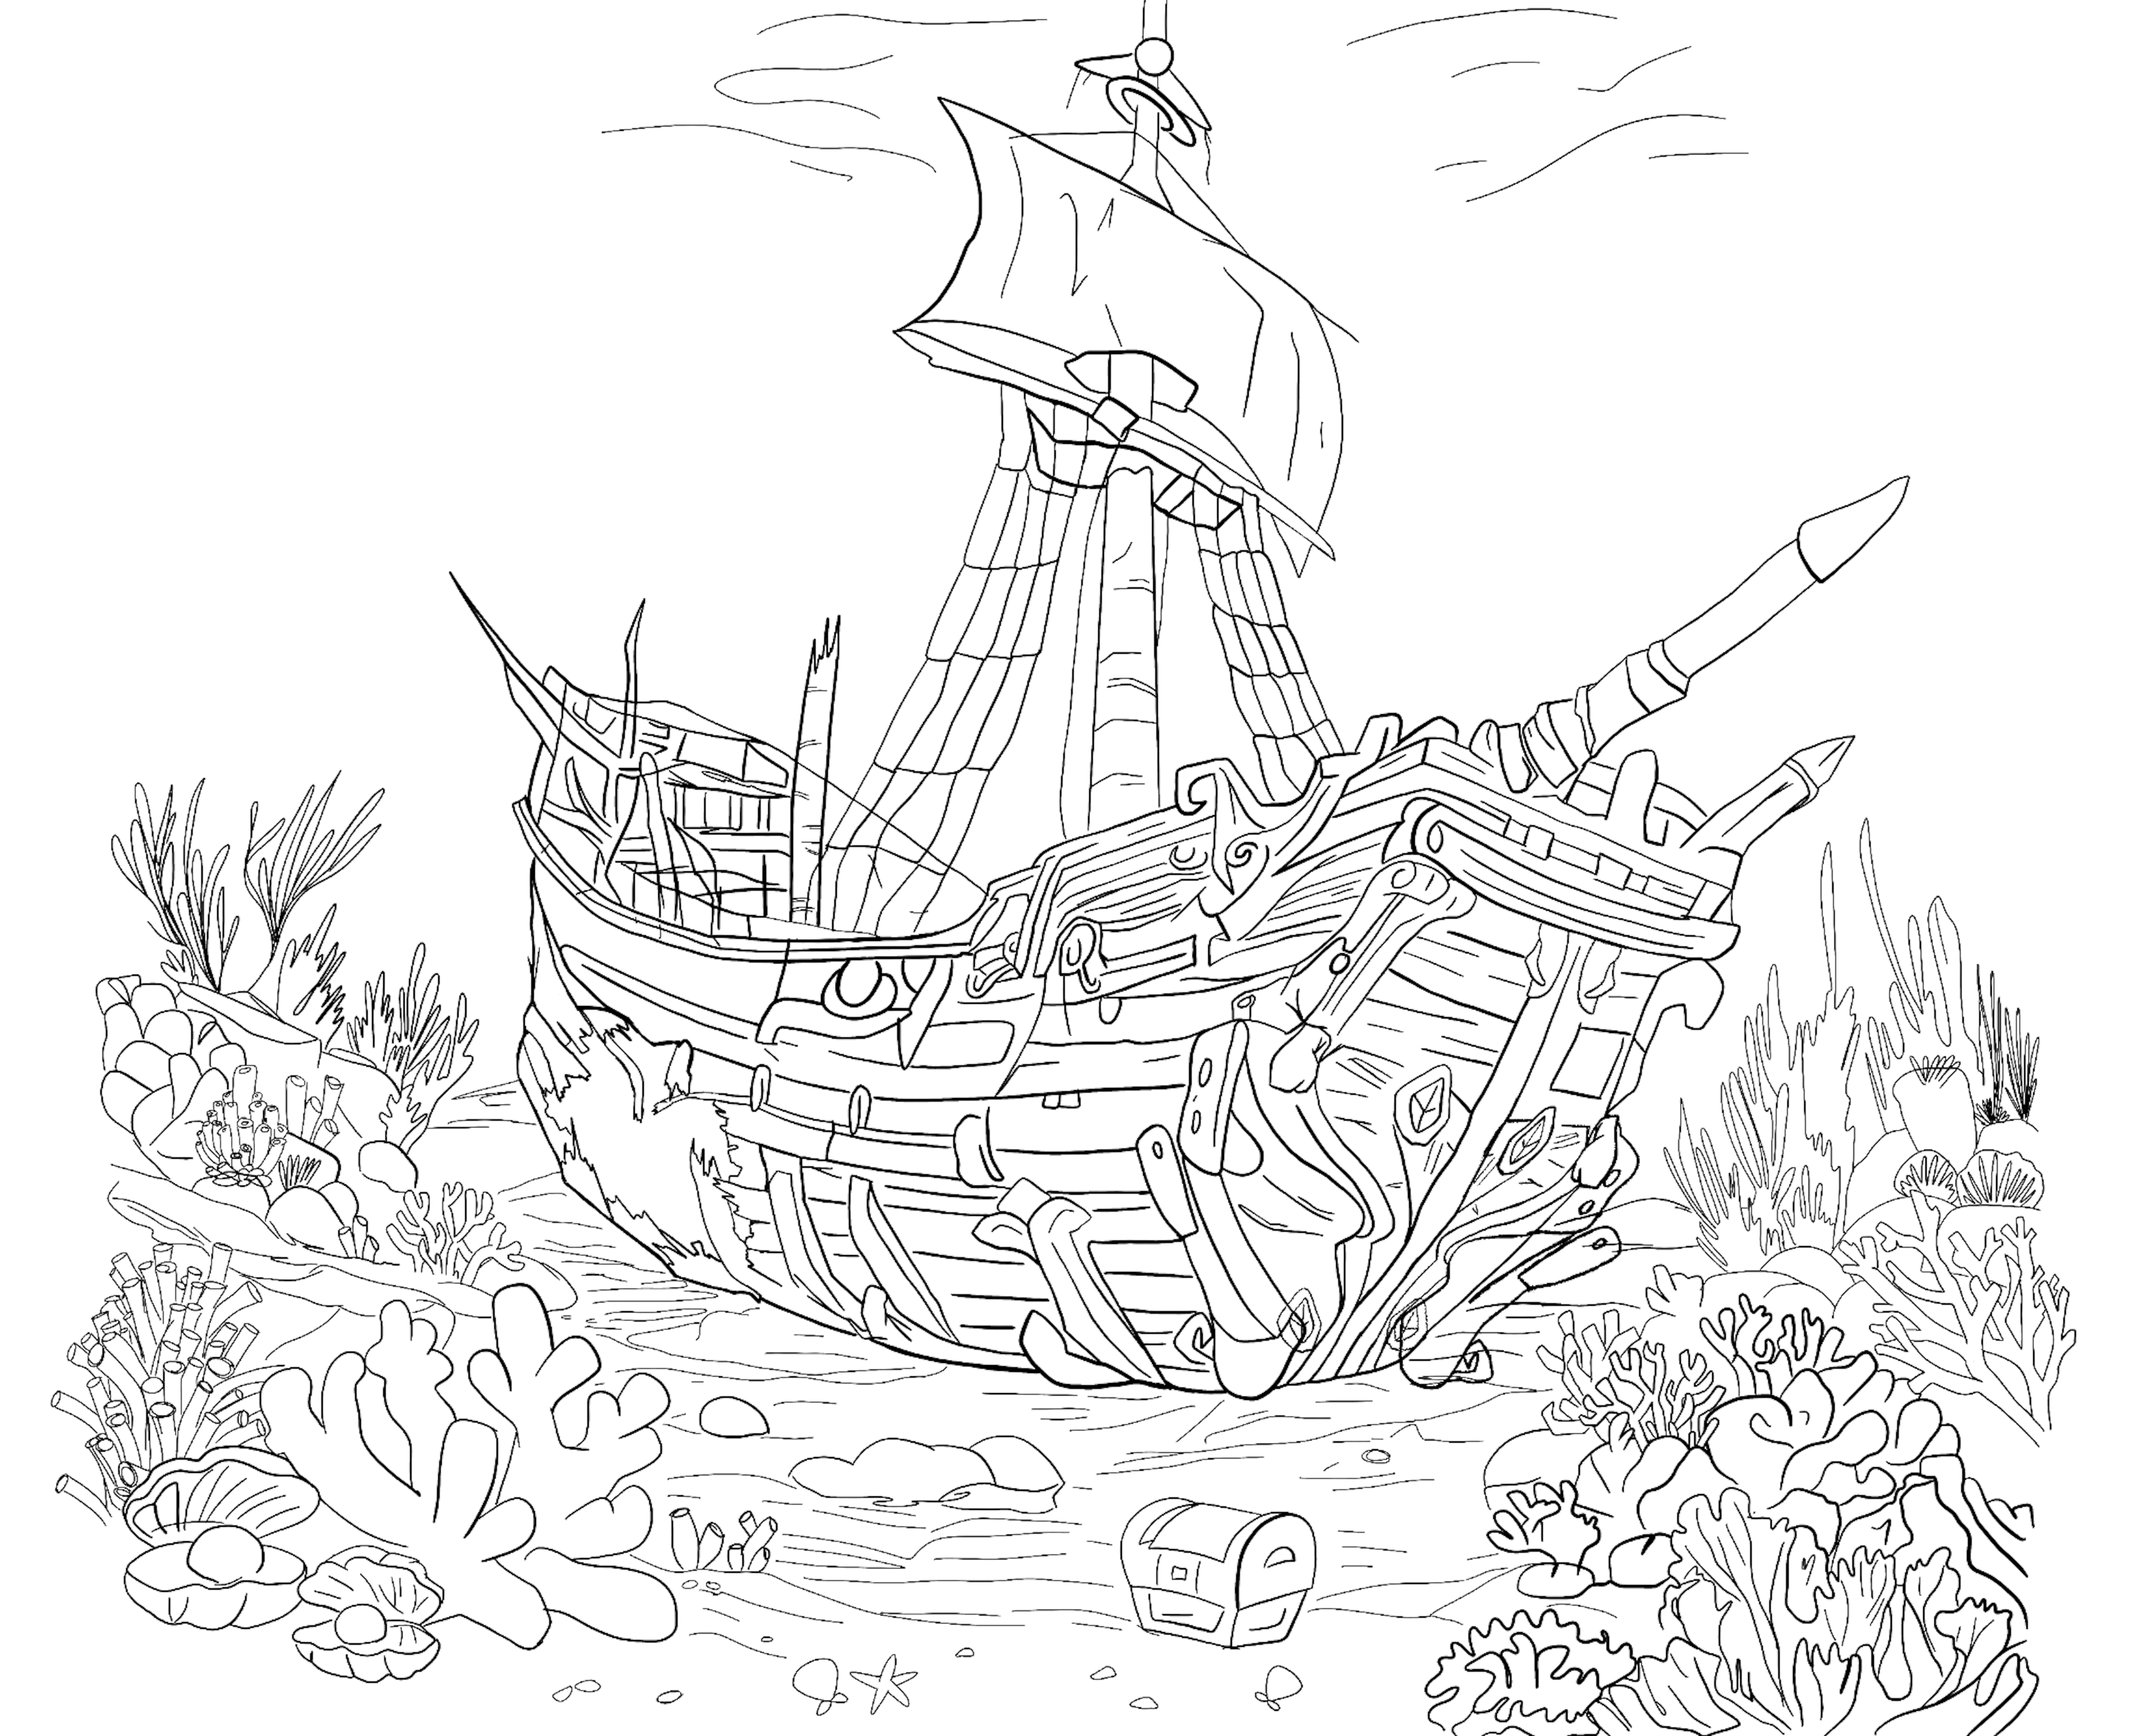 A monochromatic depiction capturing the atmospheric essence of the Shipwreck Cookie’s environmental surroundings. The shipwreck is at the centre of the visual to hone in on the characters theme and the seashells match the character's hair accessories creating a direct link.